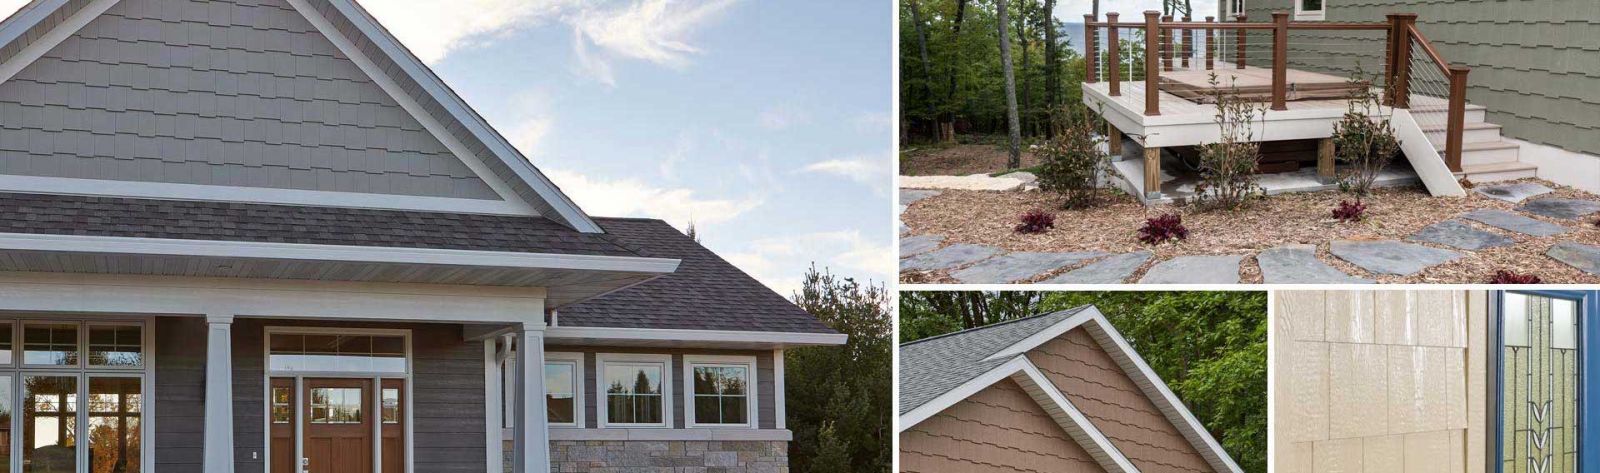 FCR Roofing and Construction Images